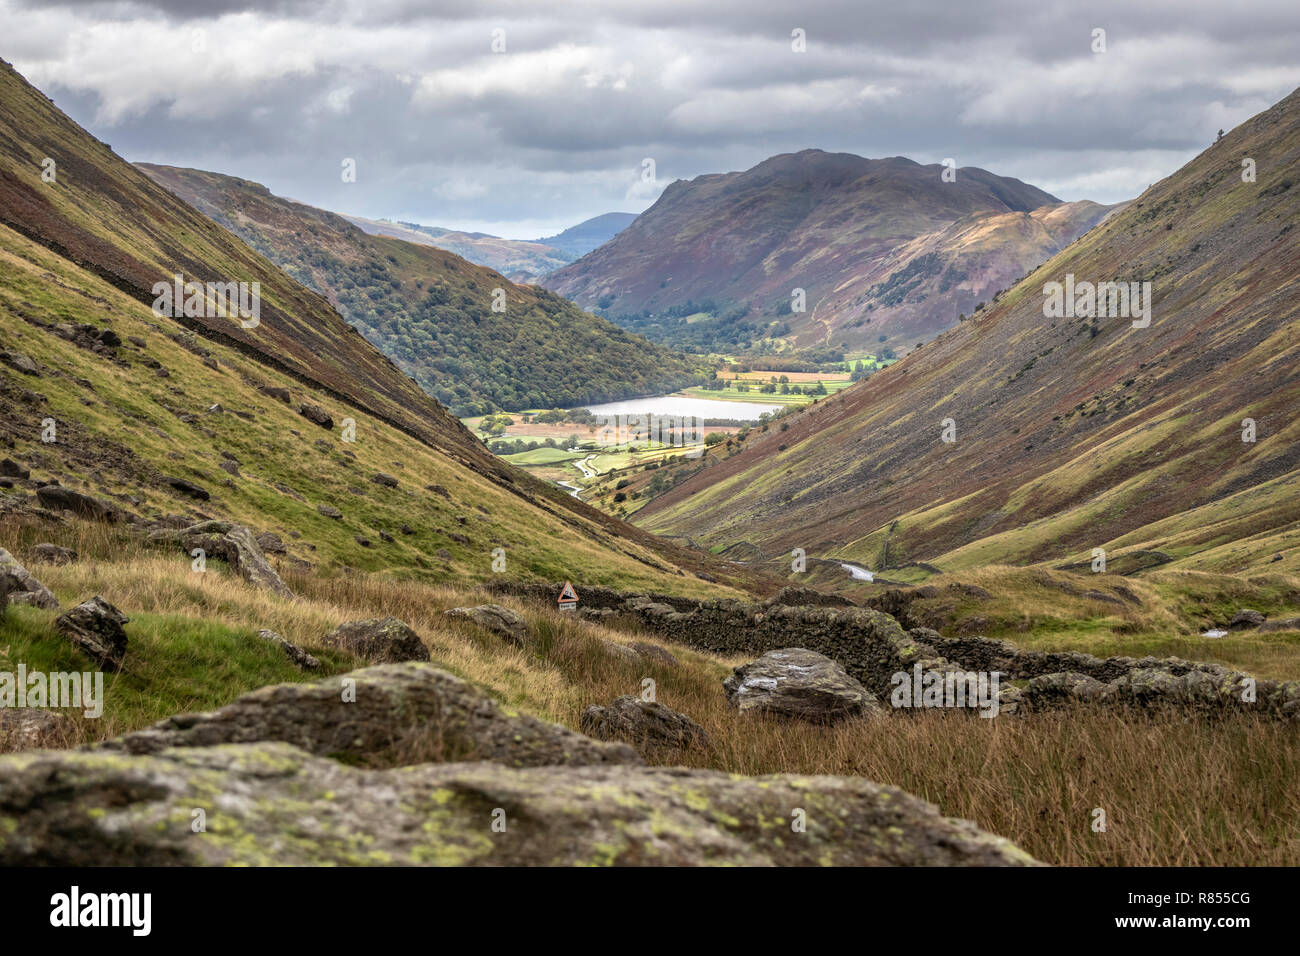 View of Brotherswater from Kirkstone Pass, Cumbria, England, UK, GB, Europe. Stock Photo